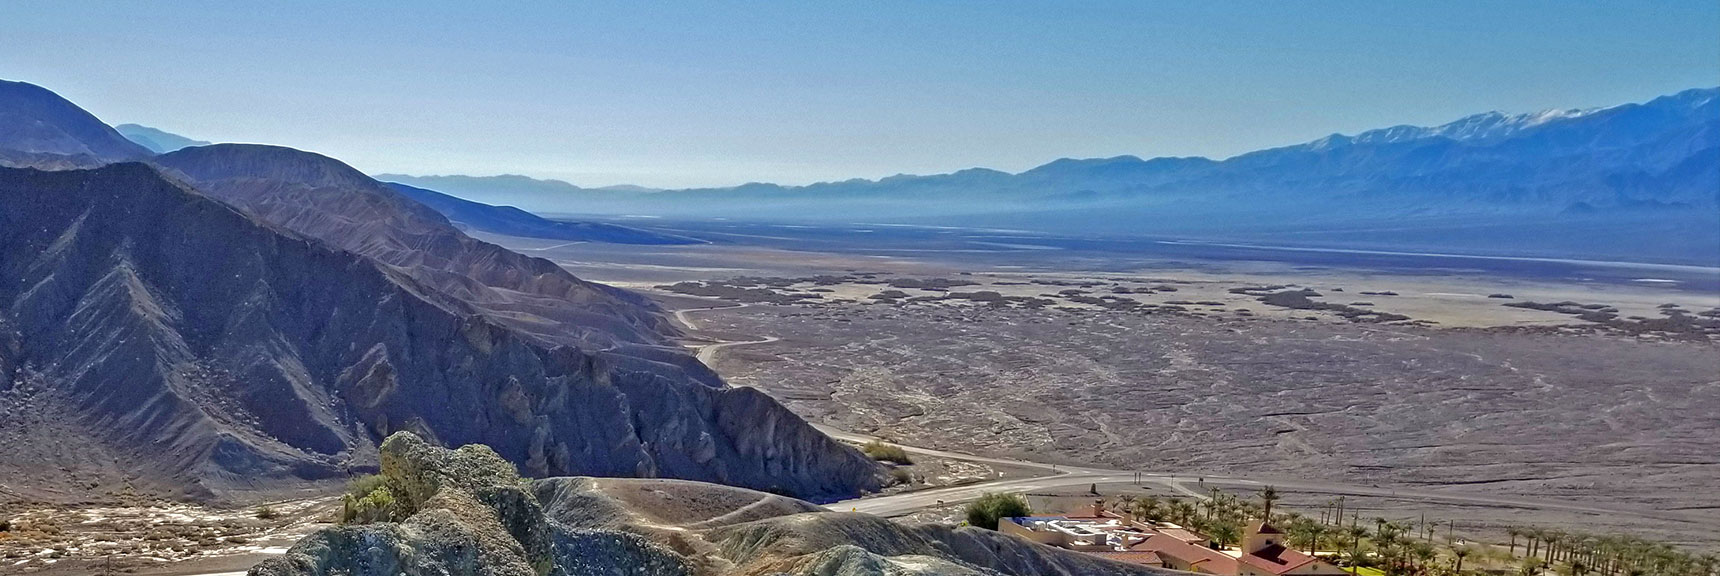 Southern View of Death Valley Viewed from Within the Tea House | Tea House & Table Rock Circuit | Furnace Creek | Death Valley National Park, California